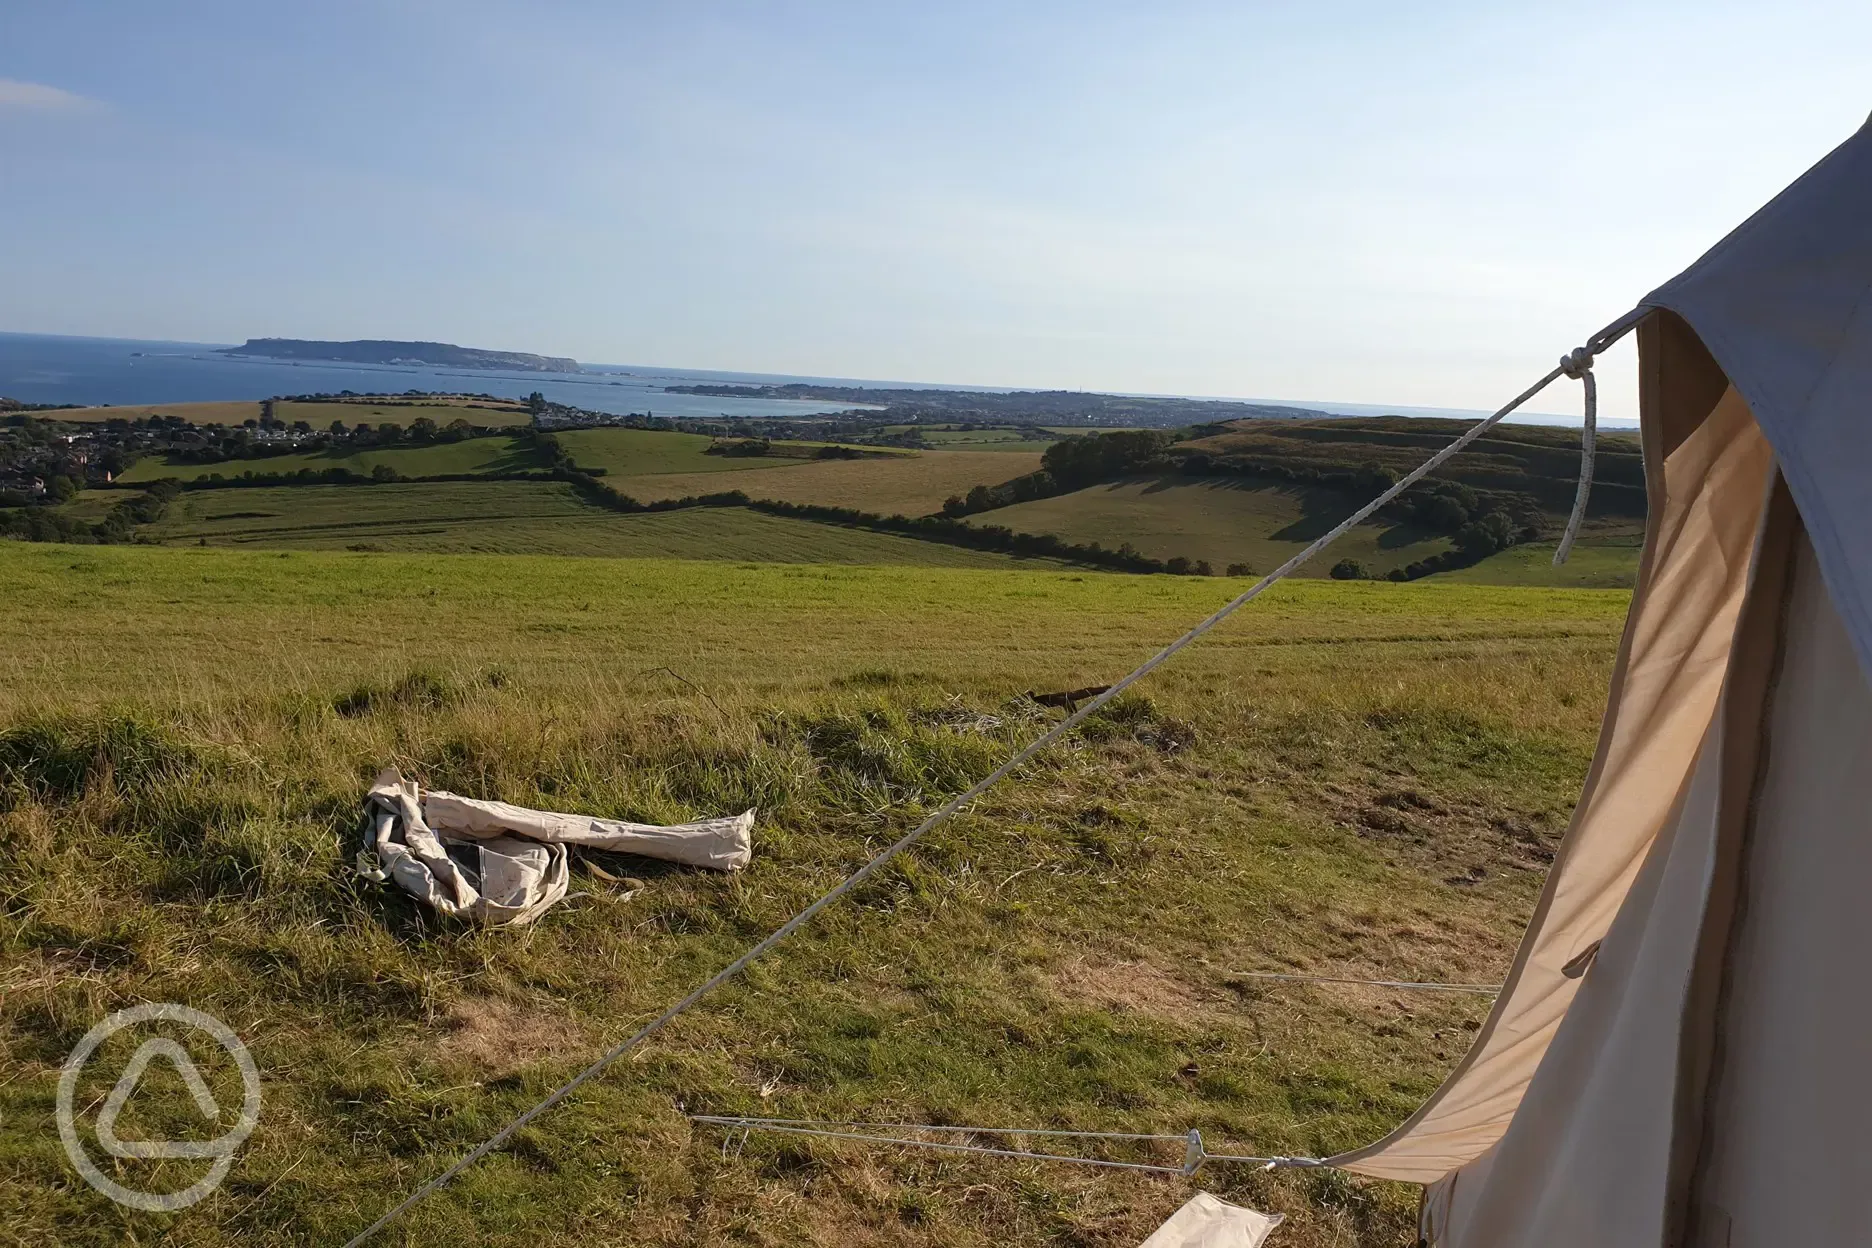 View from one of the unfurnished bell tents